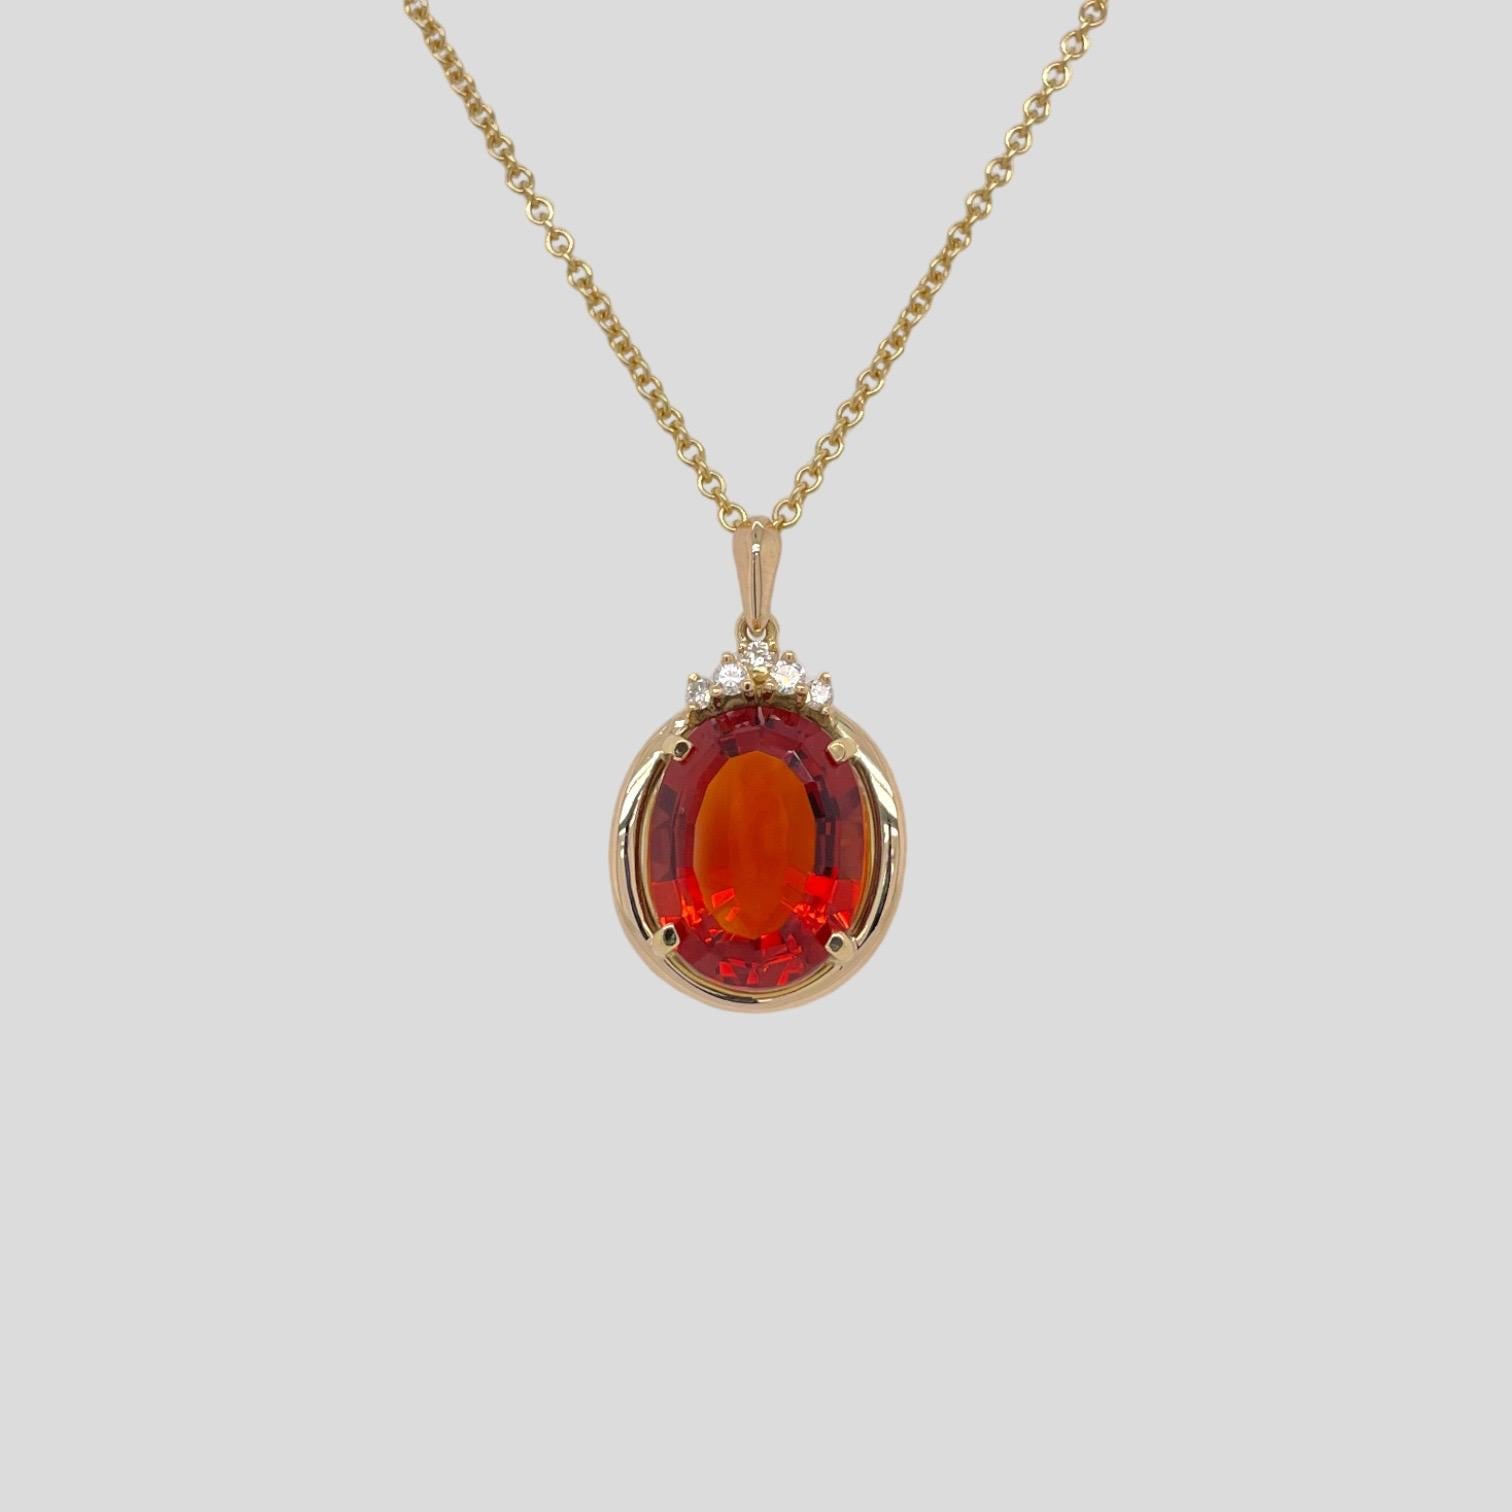 Pendant features 1 center oval brilliant shape citrine weighing approximately 5.80cts. Oval citrine is accented by 5 round brilliant diamonds, approximately 0.08tcw. Center stone measures approximately 14x11mm. Diamonds are near colorless and SI1 in